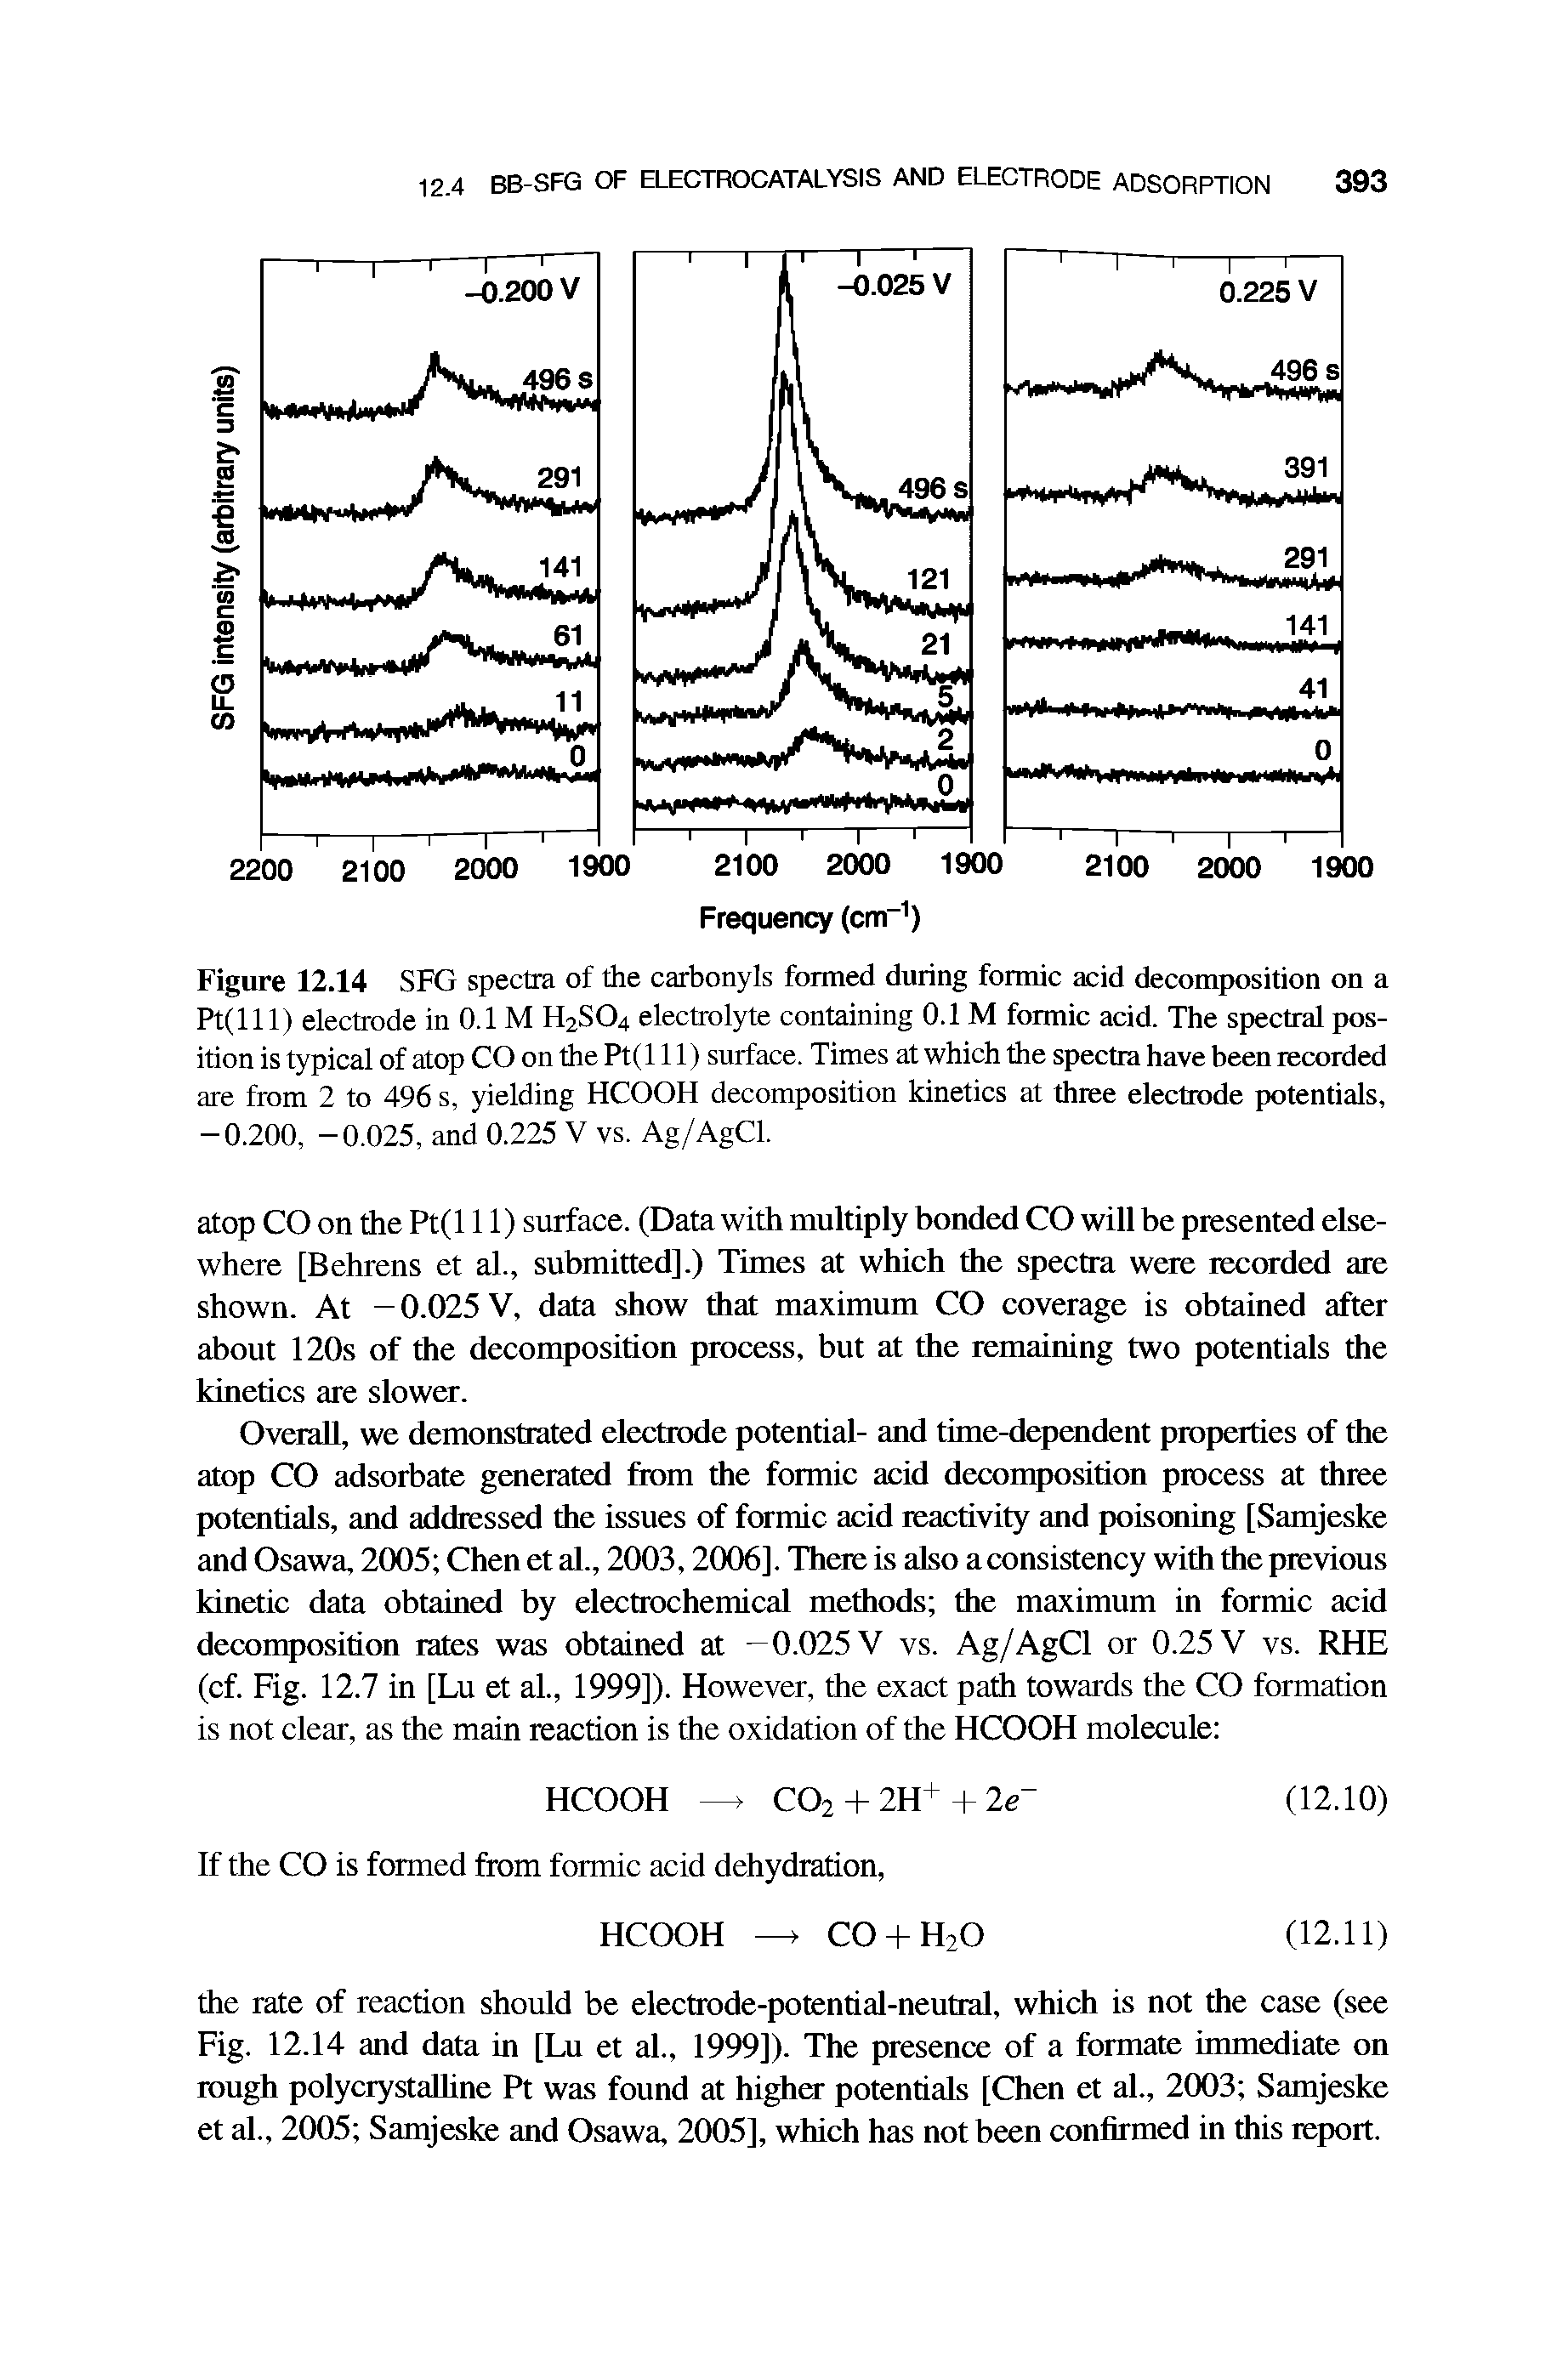 Figure 12.14 SFG spectra of the carbonyls formed during formic acid decomposition on a Pt(lll) electrode in 0.1 M H2SO4 electrolyte containing 0.1 M formic acid. The spectral position is typical of atop CO on the Pt(l 11) surface. Times at which the spectra have been recorded are from 2 to 496 s, yielding HCOOH decomposition kinetics at three electrode potentials, -0.200, -0.025, and 0.225 V vs. Ag/AgCl.